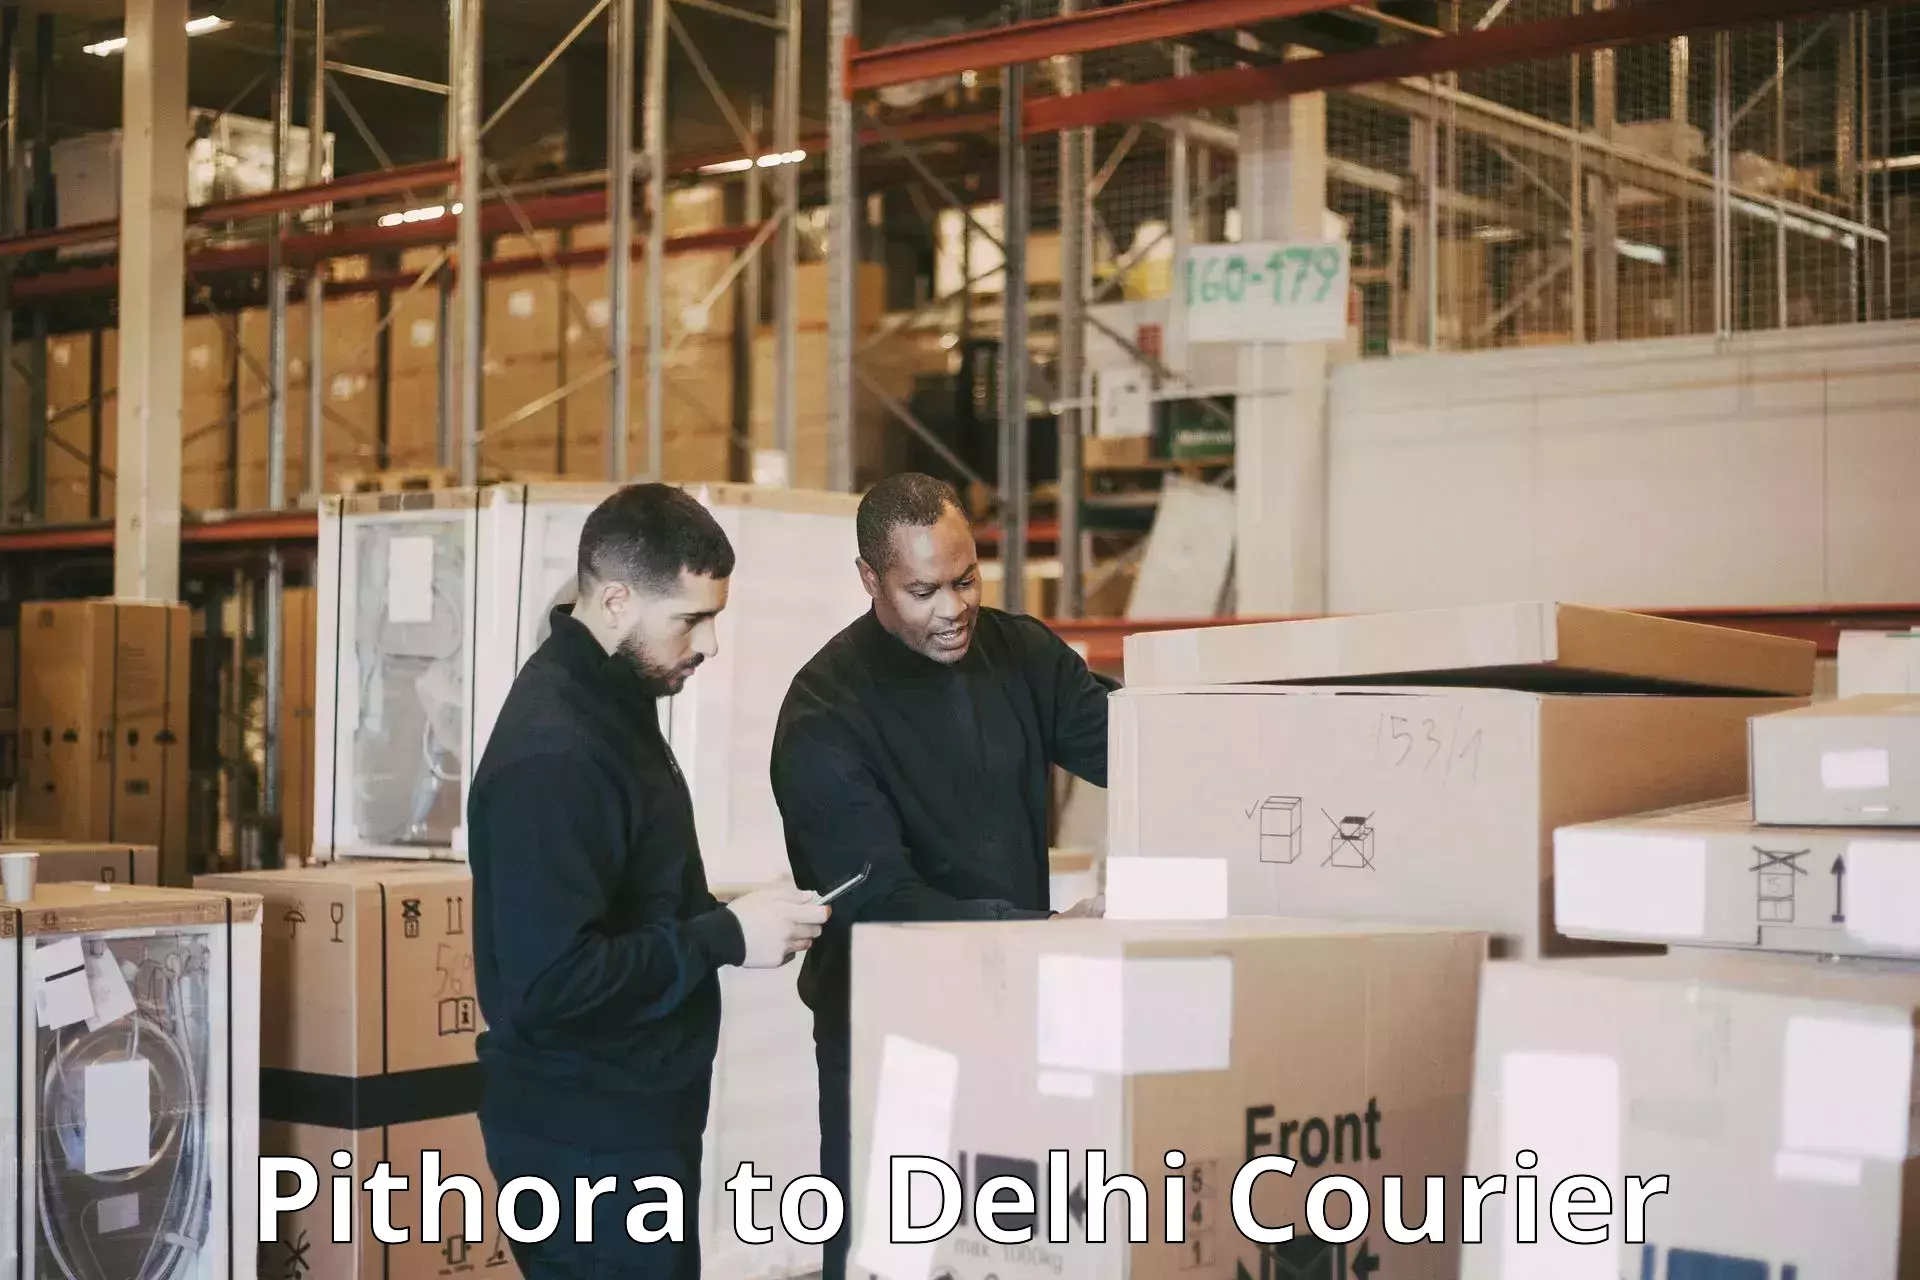 Flexible delivery schedules Pithora to Lodhi Road